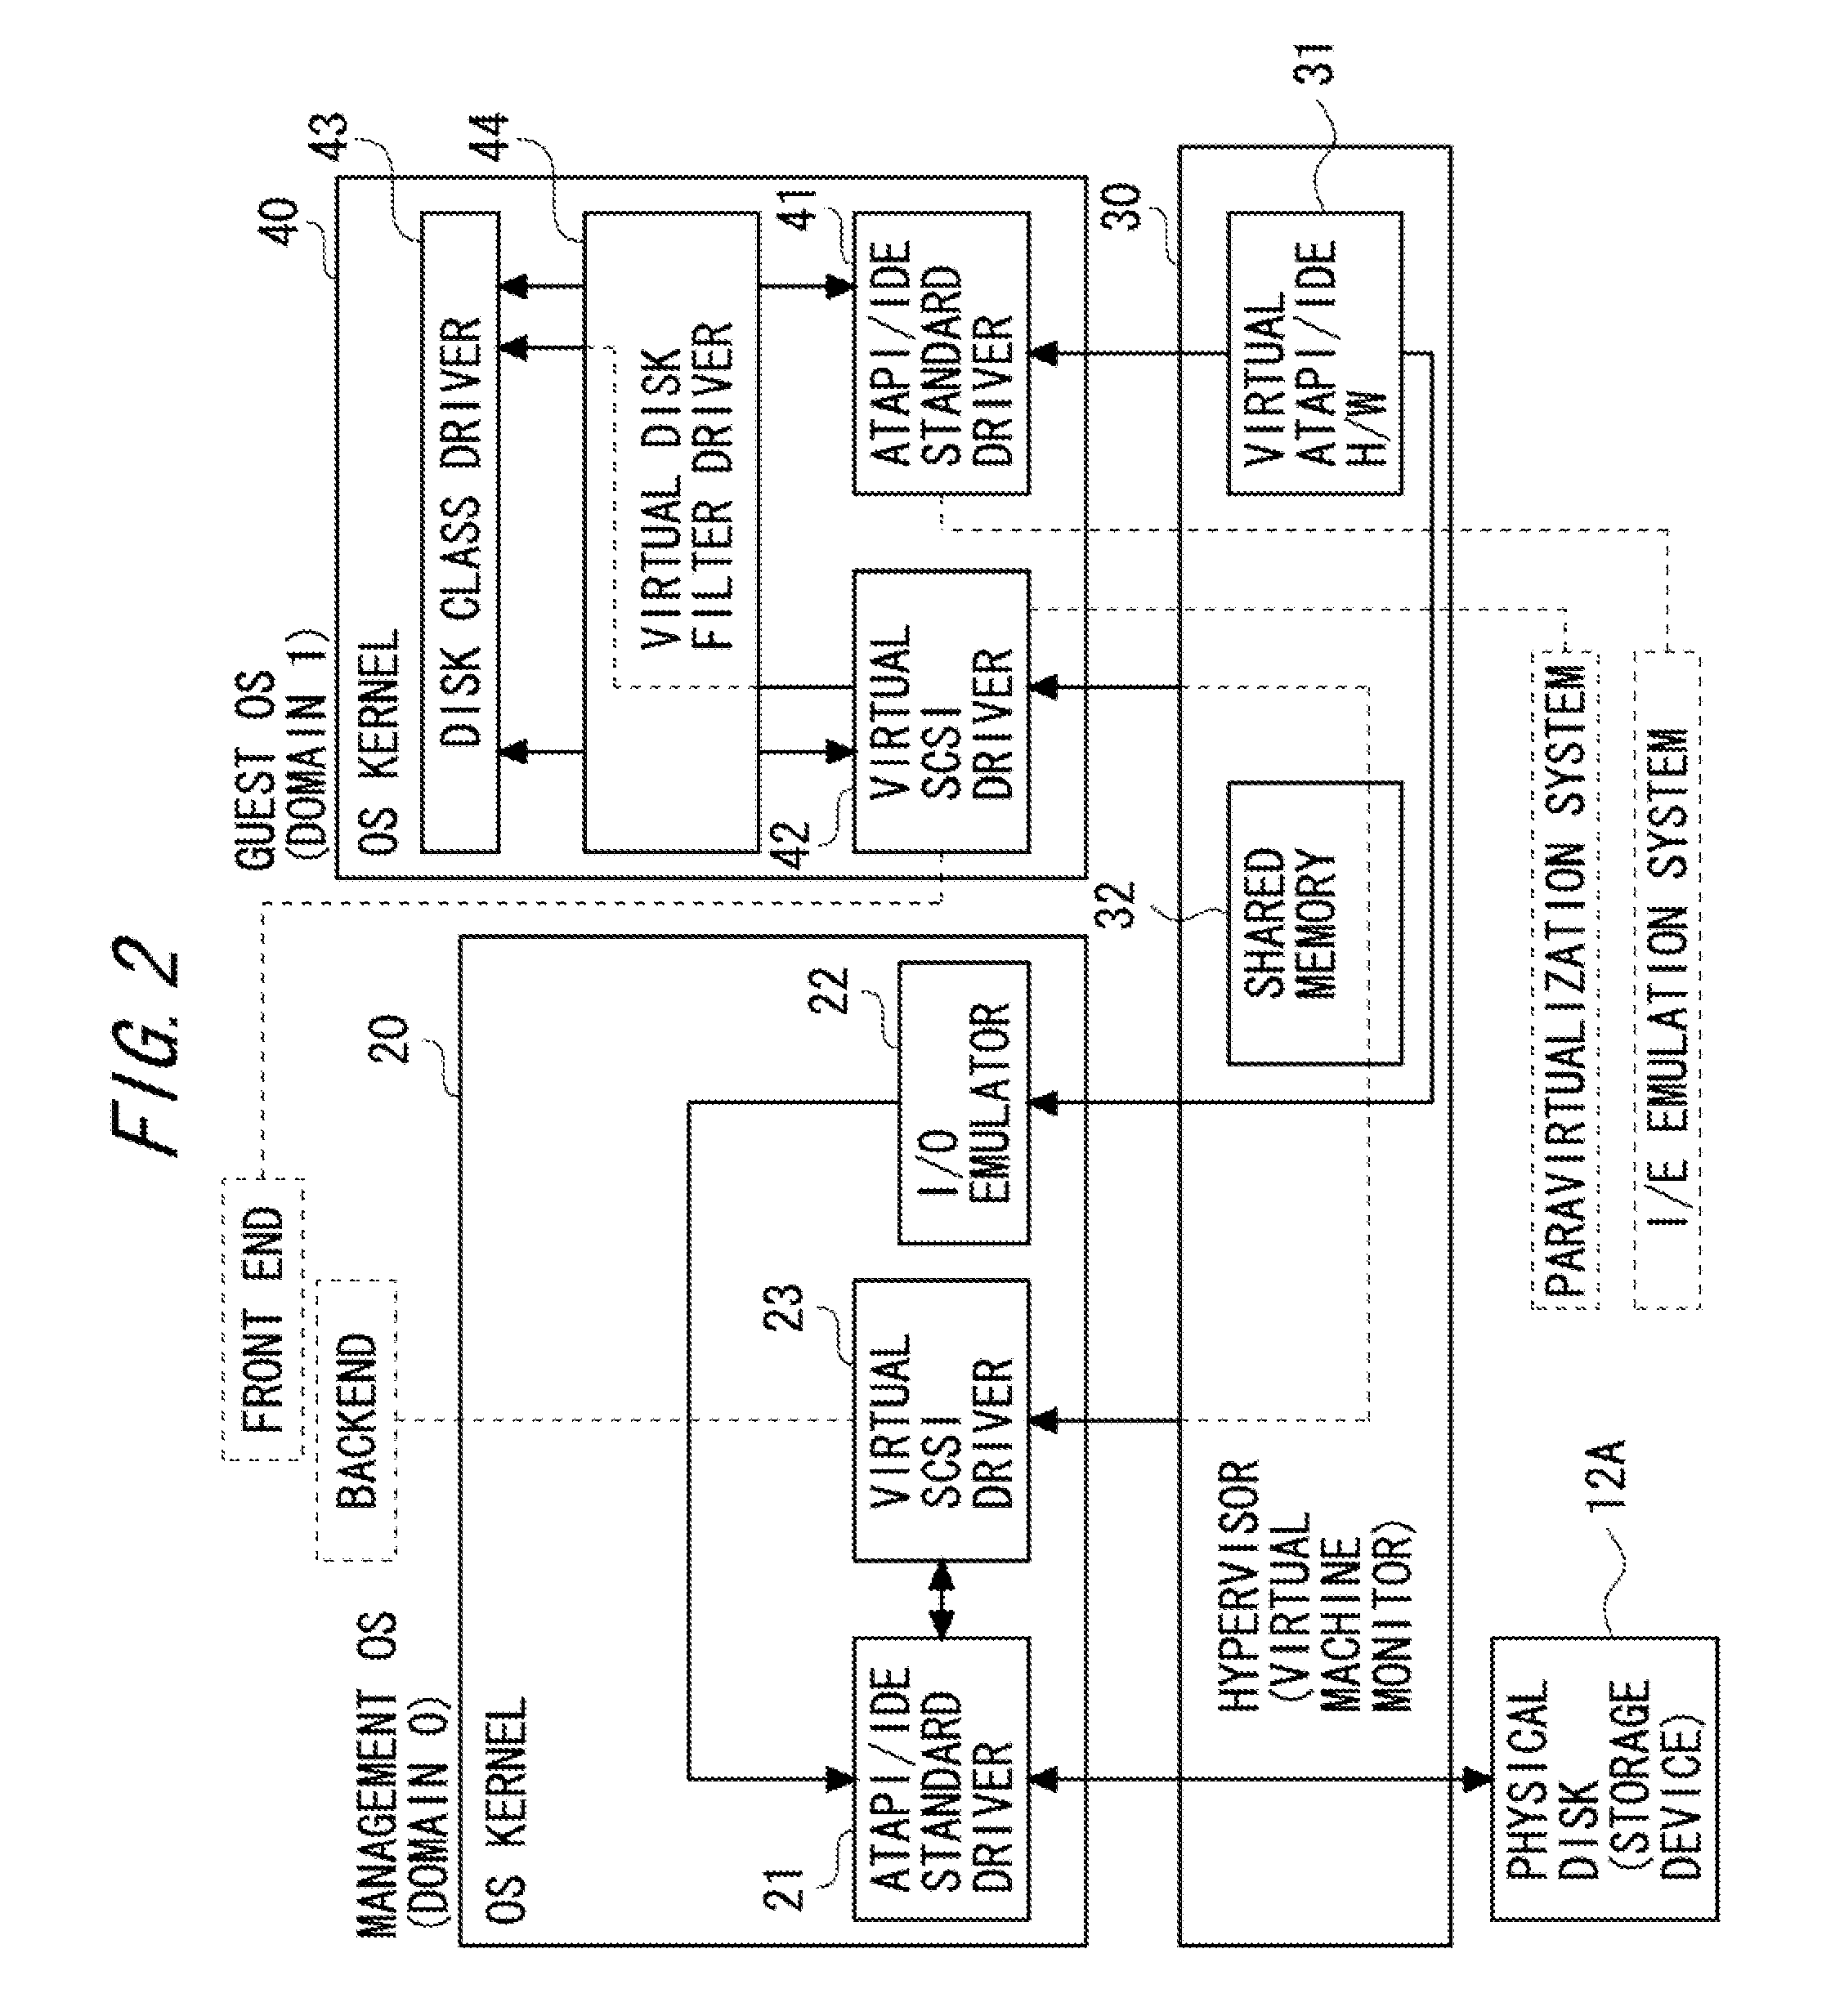 Disk access system switching device